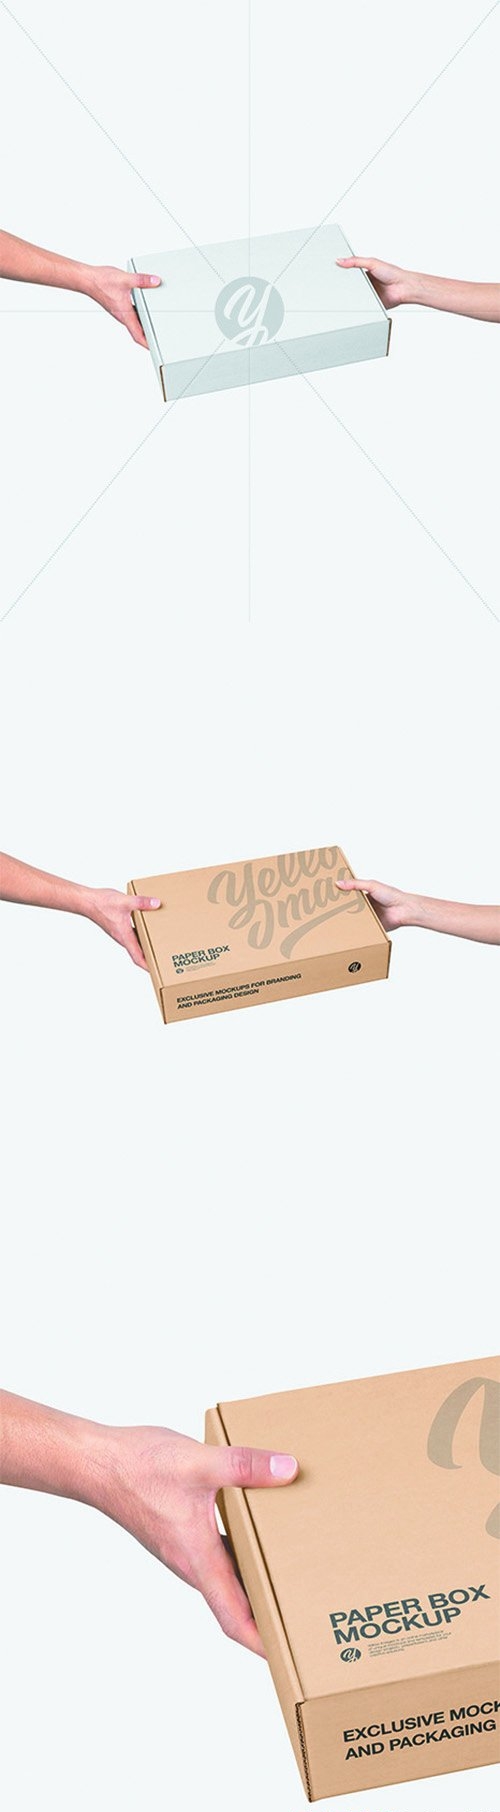 Mailing Box in Hands Mockup 66109